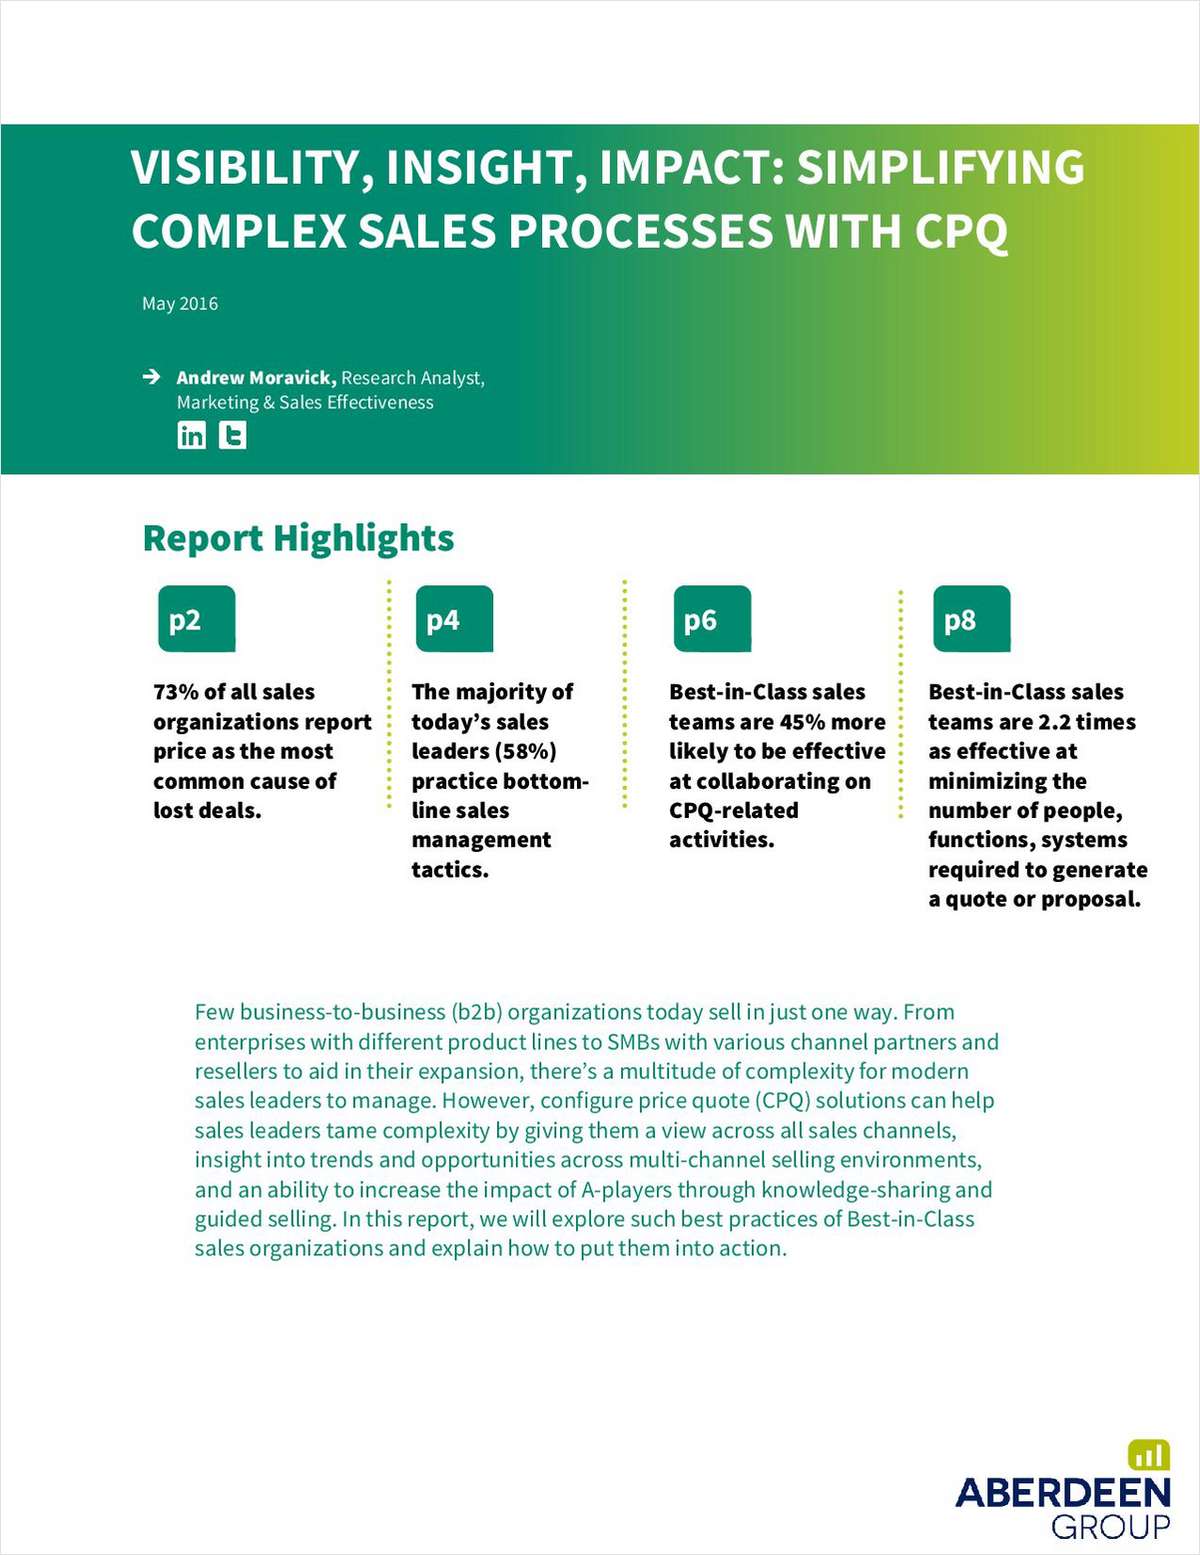 Aberdeen Report: Here's How Best-In-Class Organizations are Simplifying Complex Sales Processes